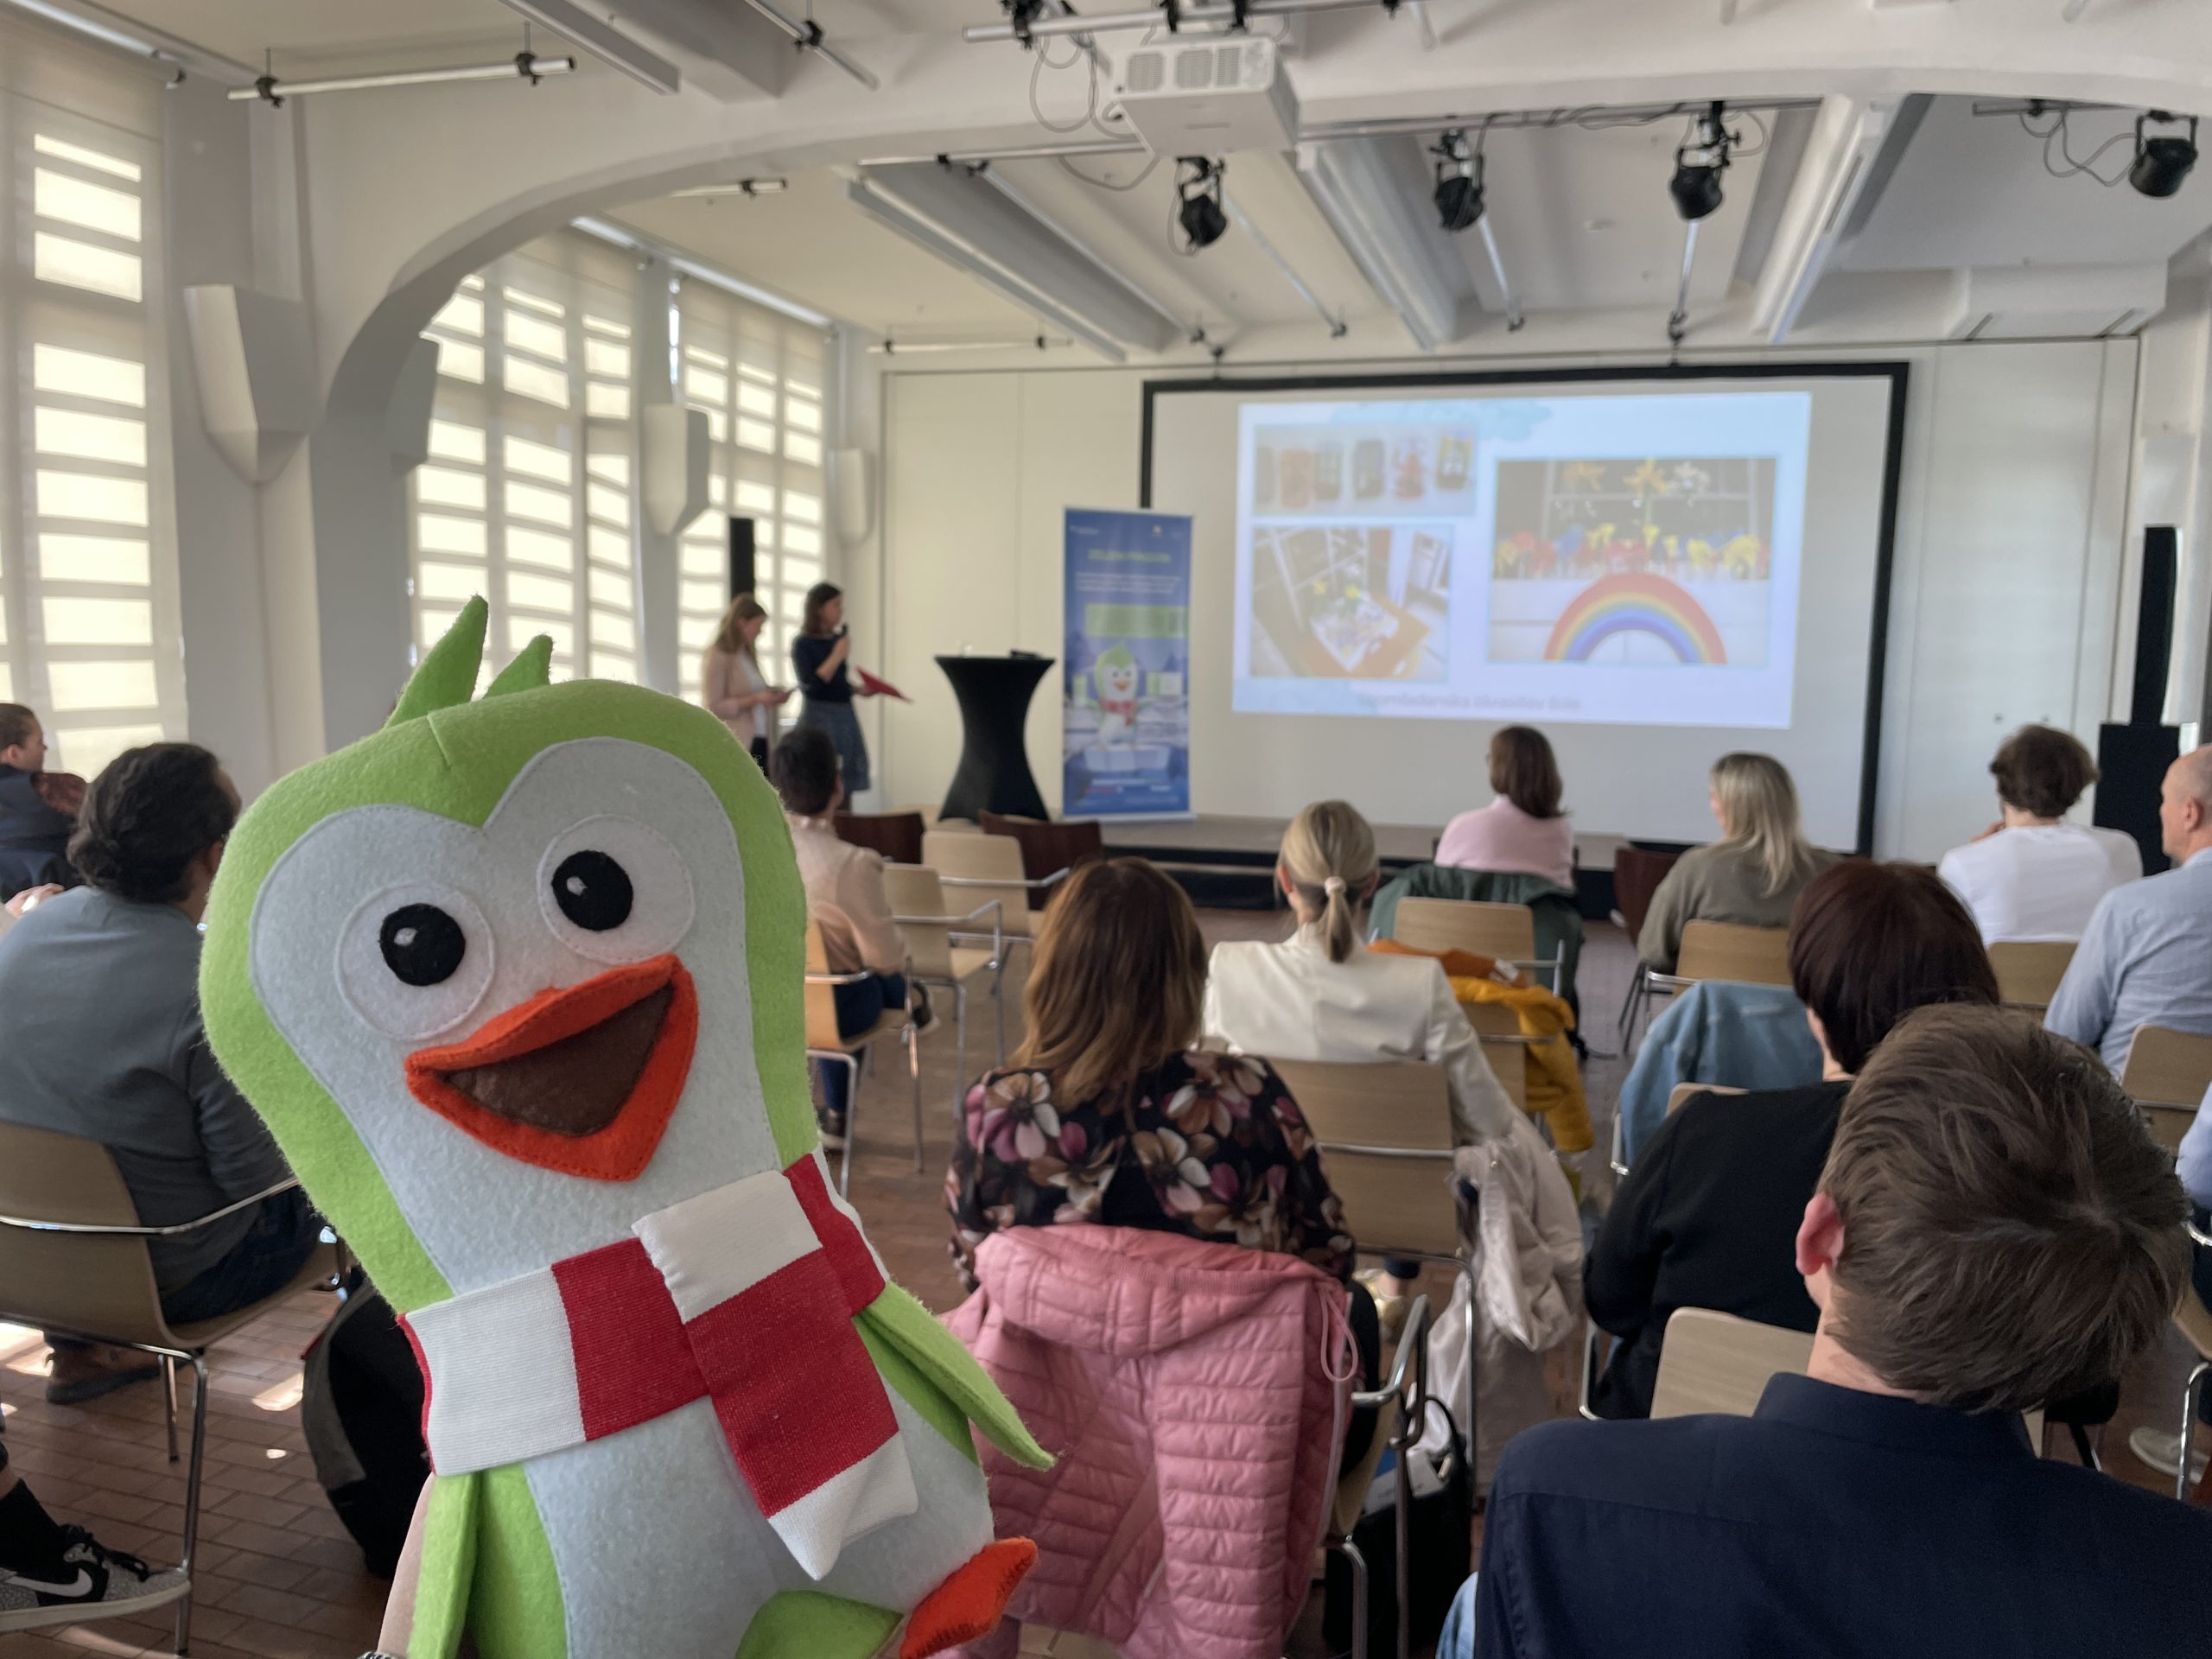 A plush Green Penguin mascot is placed in the centre, while participants watch the presentation on a screen in the background.